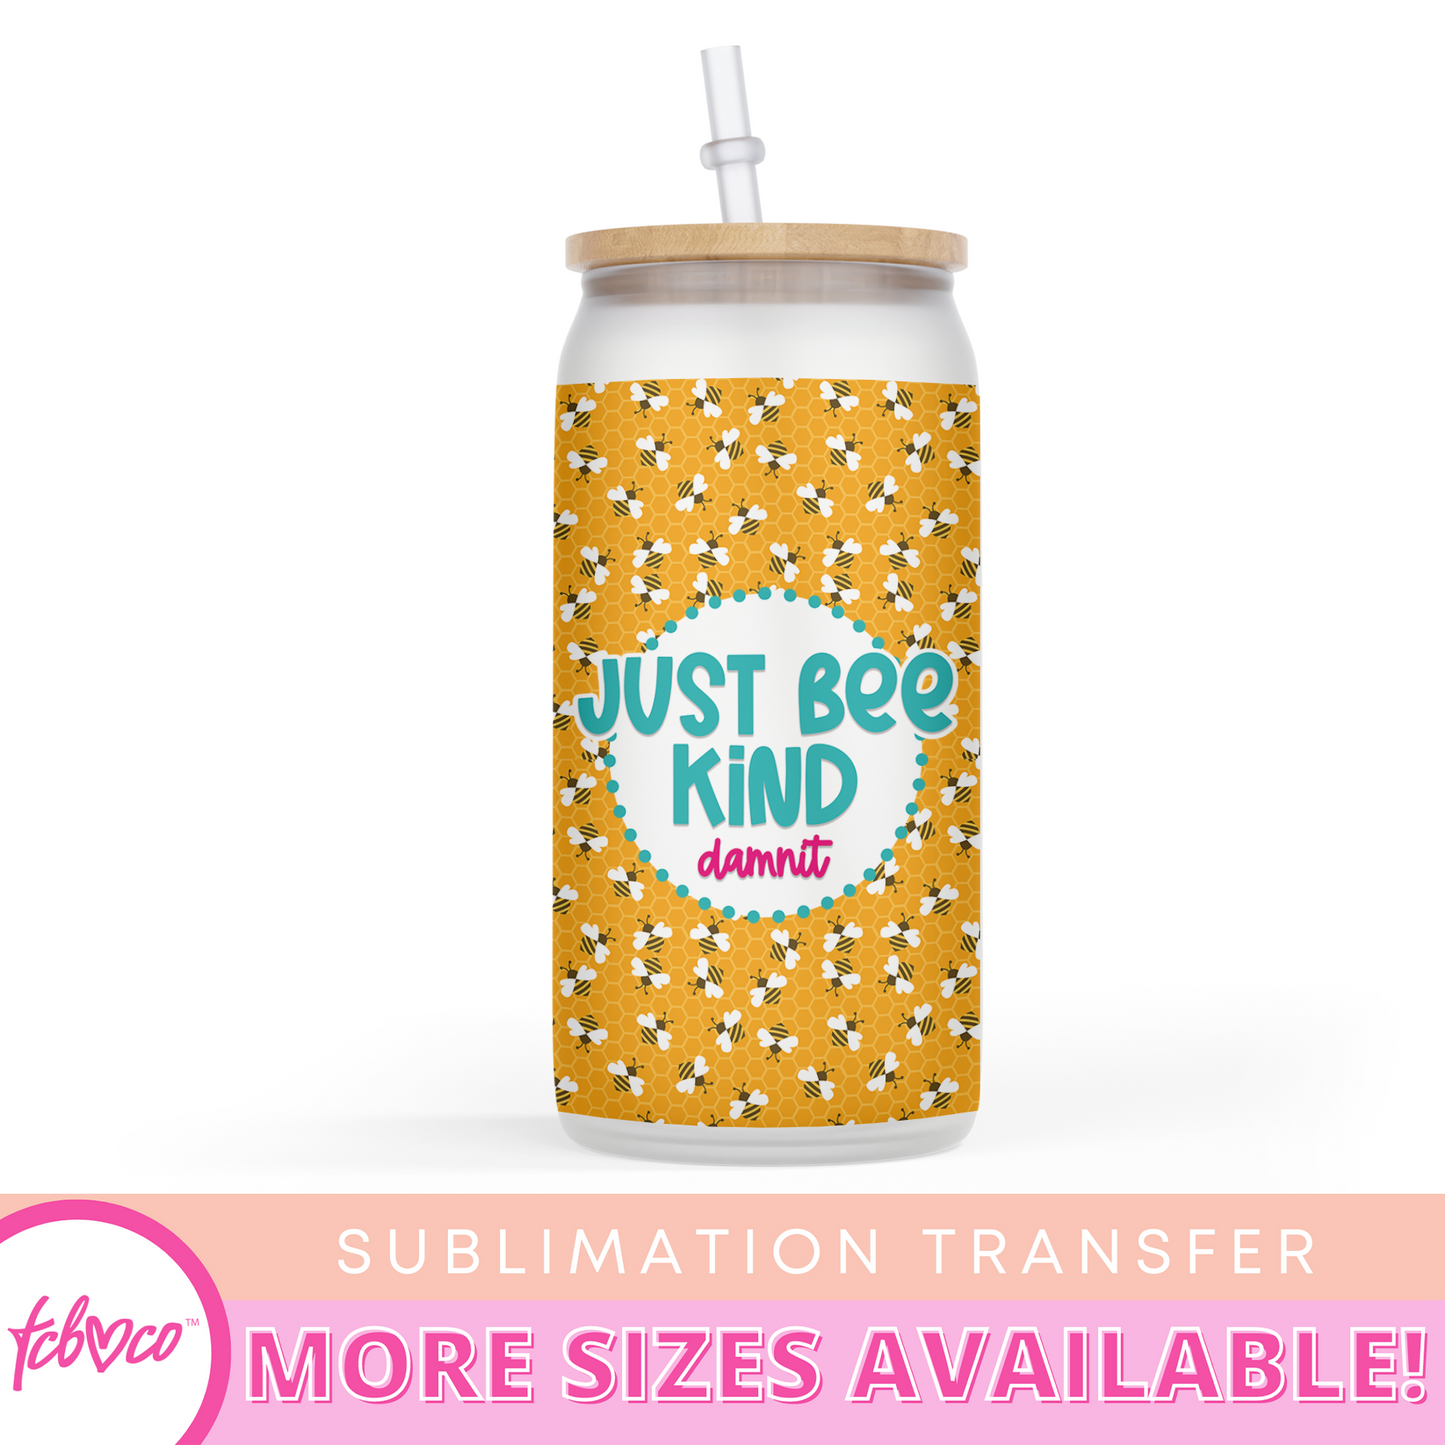 Just Bee Kind Damnit Cosmetic Bag Sublimation Transfer